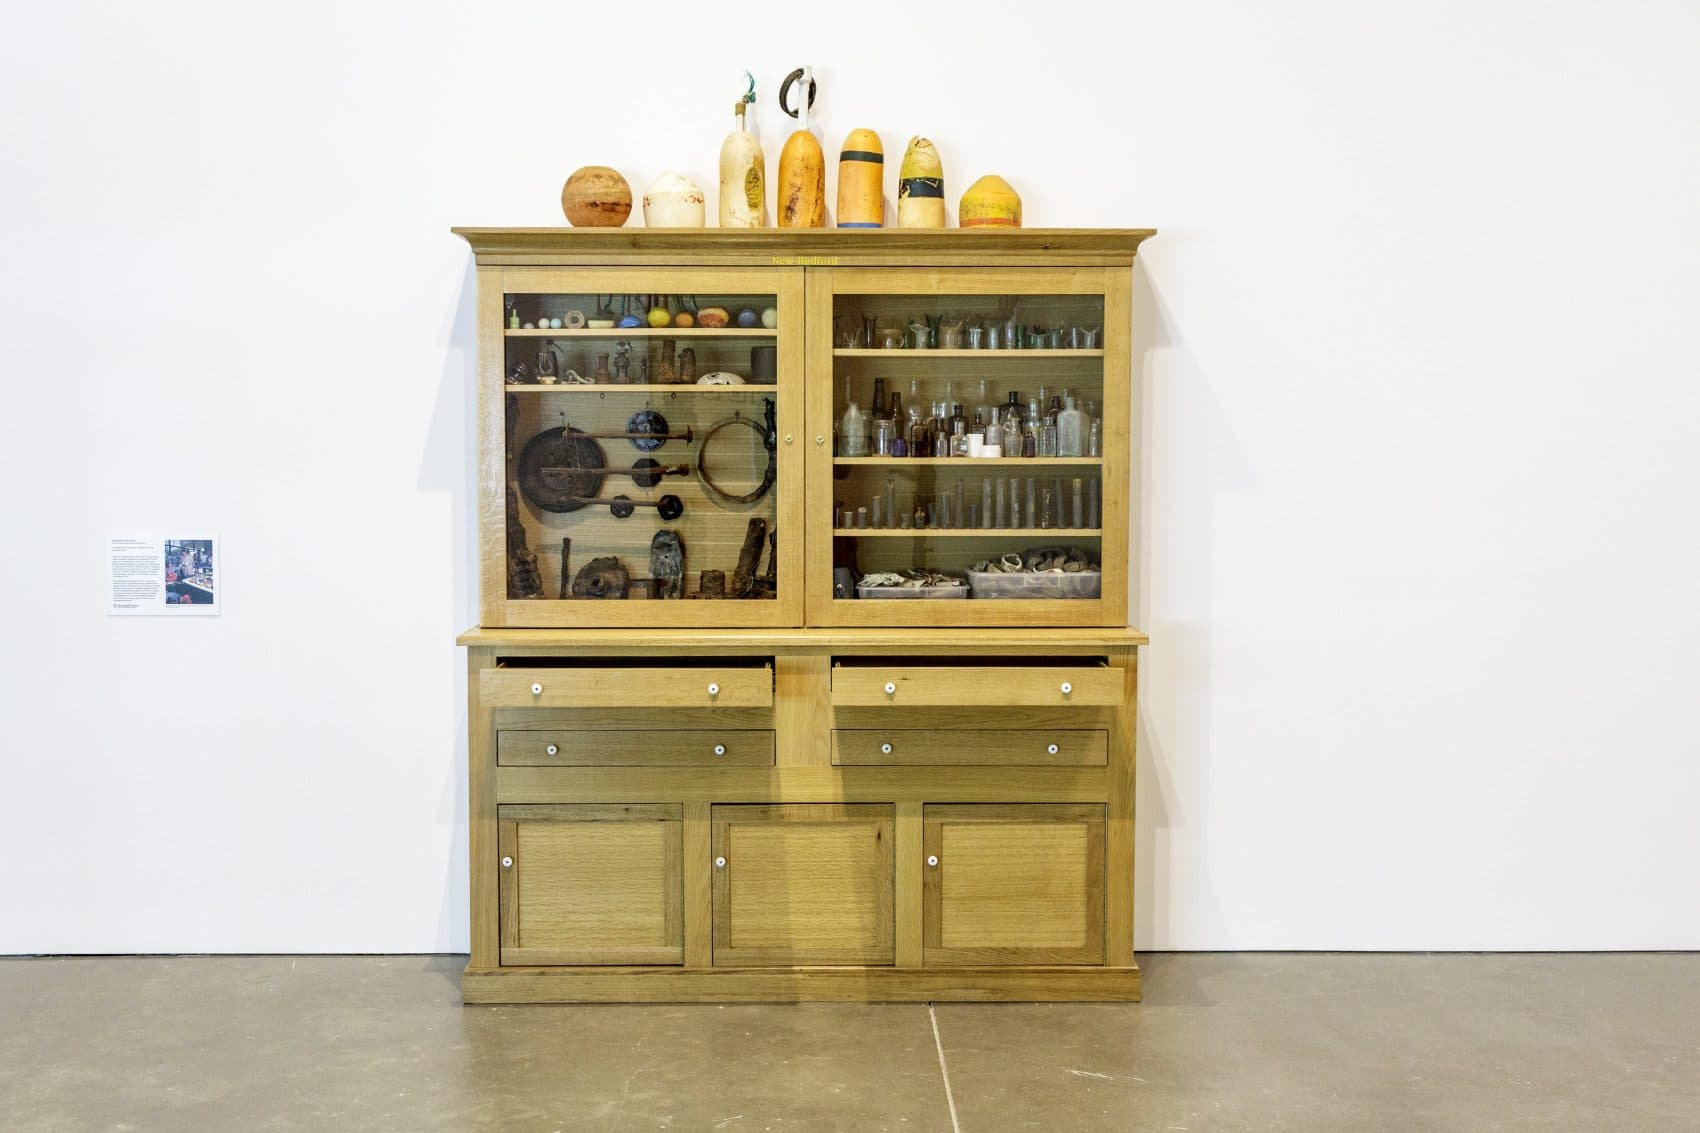 Mark Dion, New Bedford Cabinet, 2001. Wooden-and-glass cabinet and dig finds, 104 × 74 × 19 inches (264.2 × 188 × 48.3 cm). The Institute of Contemporary Art/Boston, General Acquisition Fund. Courtesy the artist and Tanya Bonakdar Gallery, New York. Photo by John Kennard. © Mark Dion